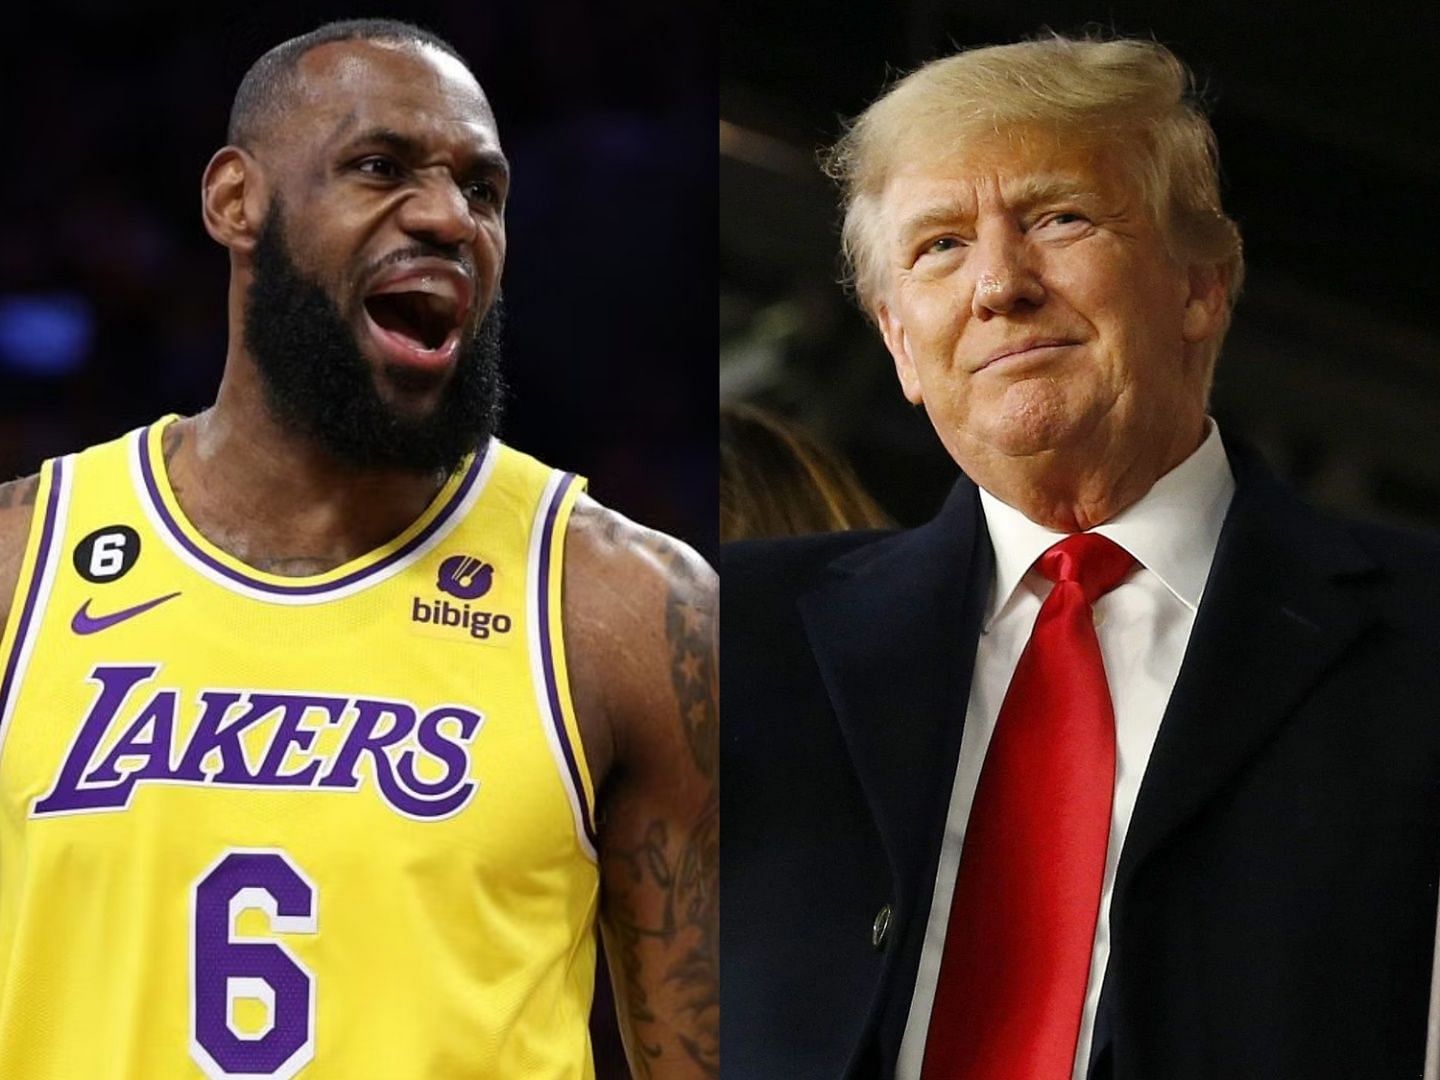 LeBron James of the LA Lakers and former US president Donald Trump.